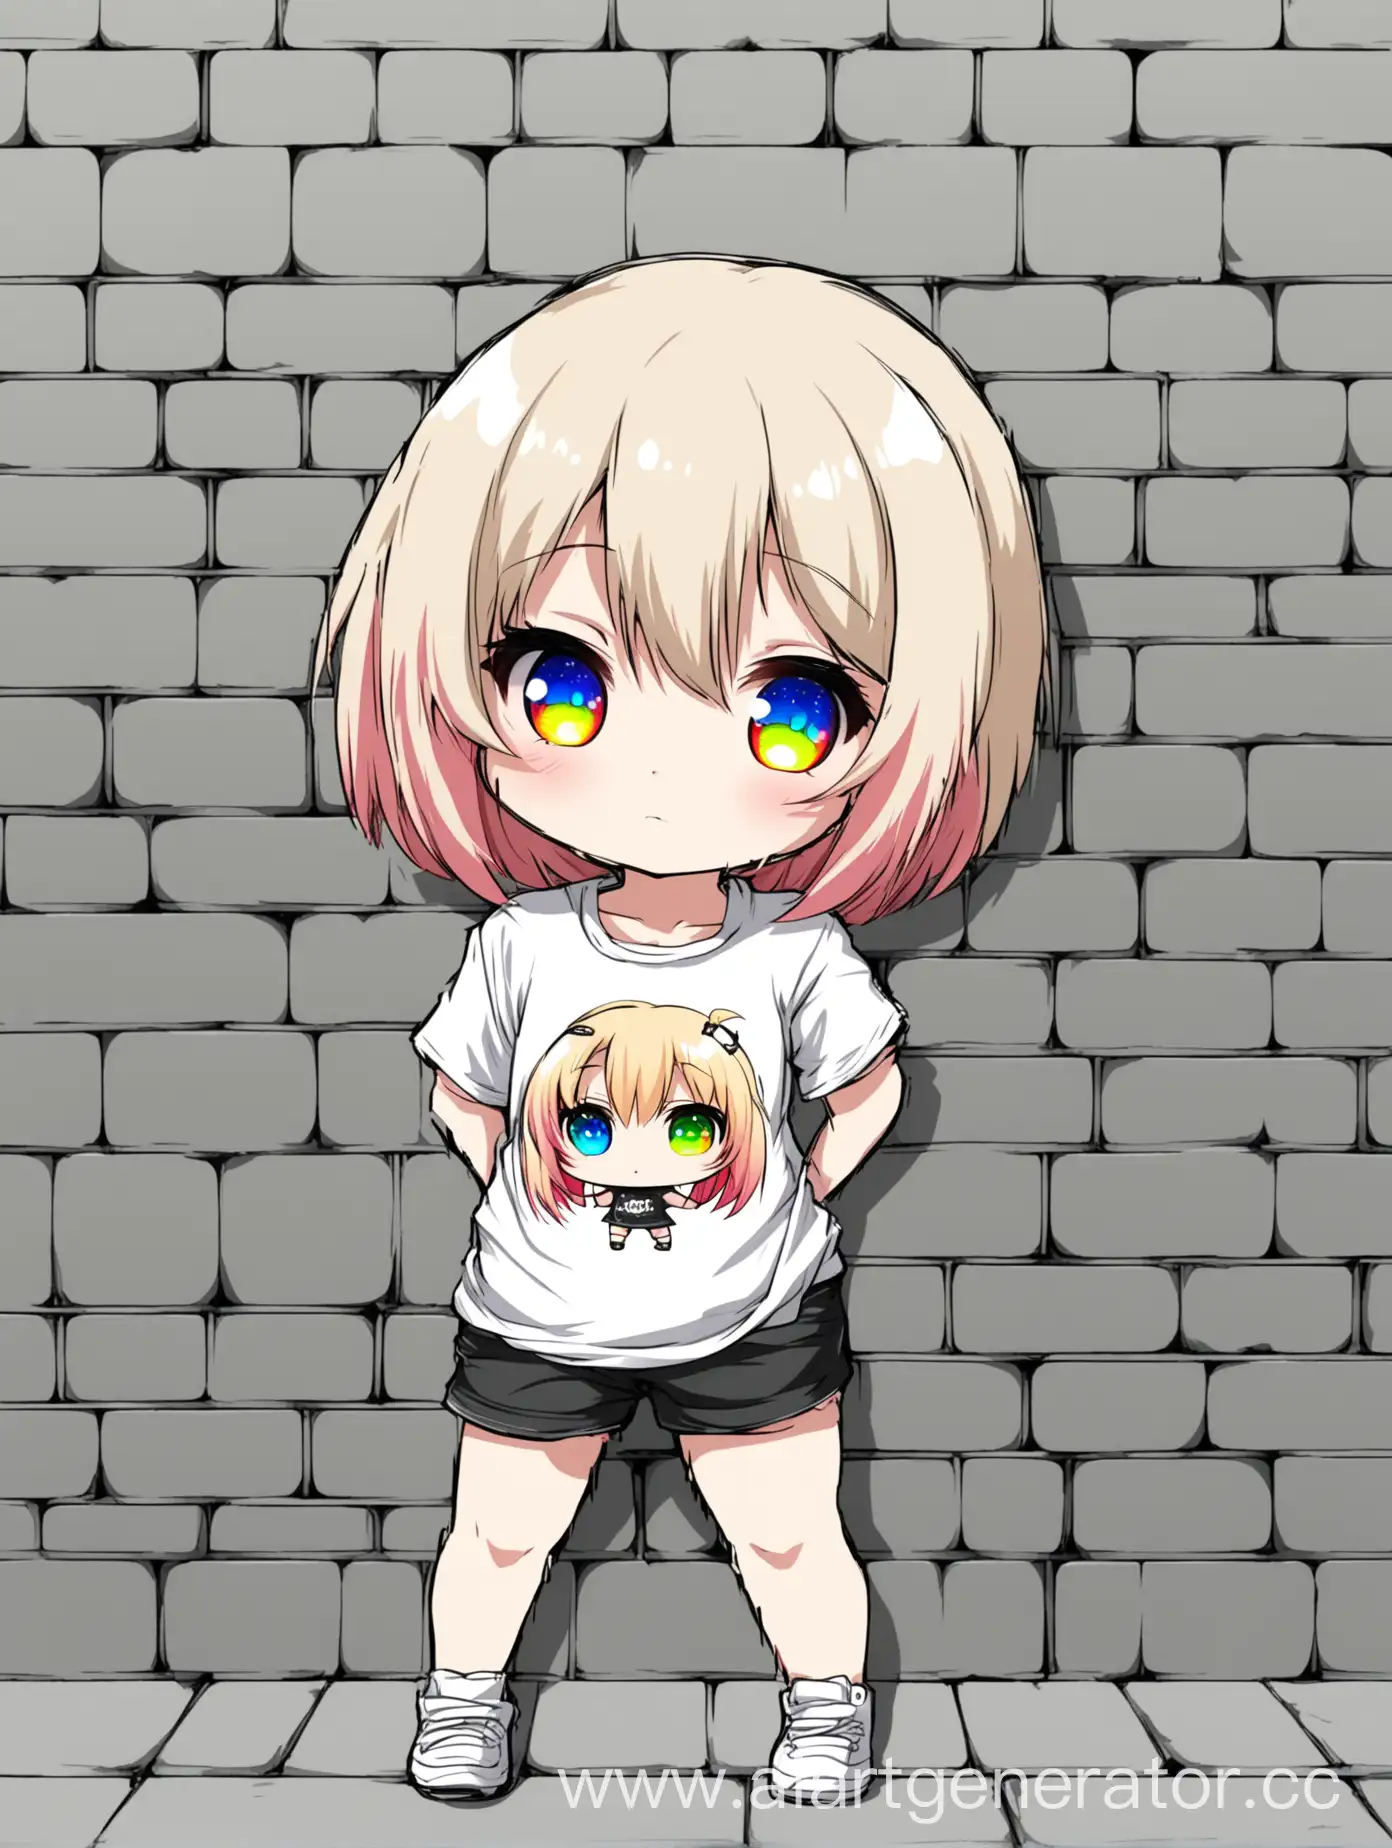 Chibi-Anime-Girl-Leaning-Over-Wall-with-Multicolored-Eyes-and-White-TShirt